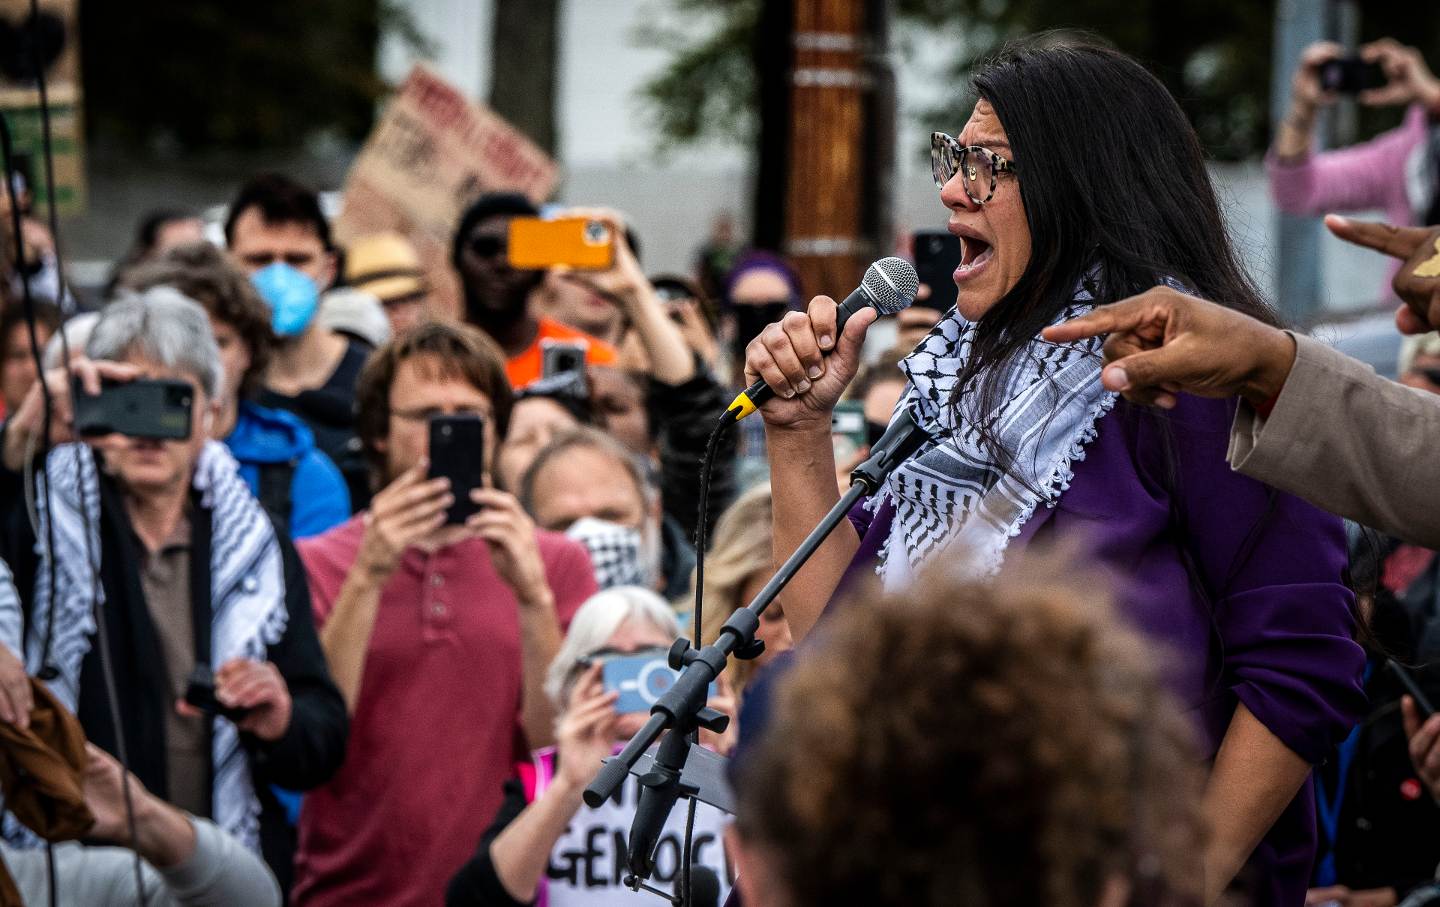 Representative Rashida Tlaib addresses the crowd as Jewish Voice for Peace holds a large rally and civil disobedience action at the US Capitol, in Washington, D.C.